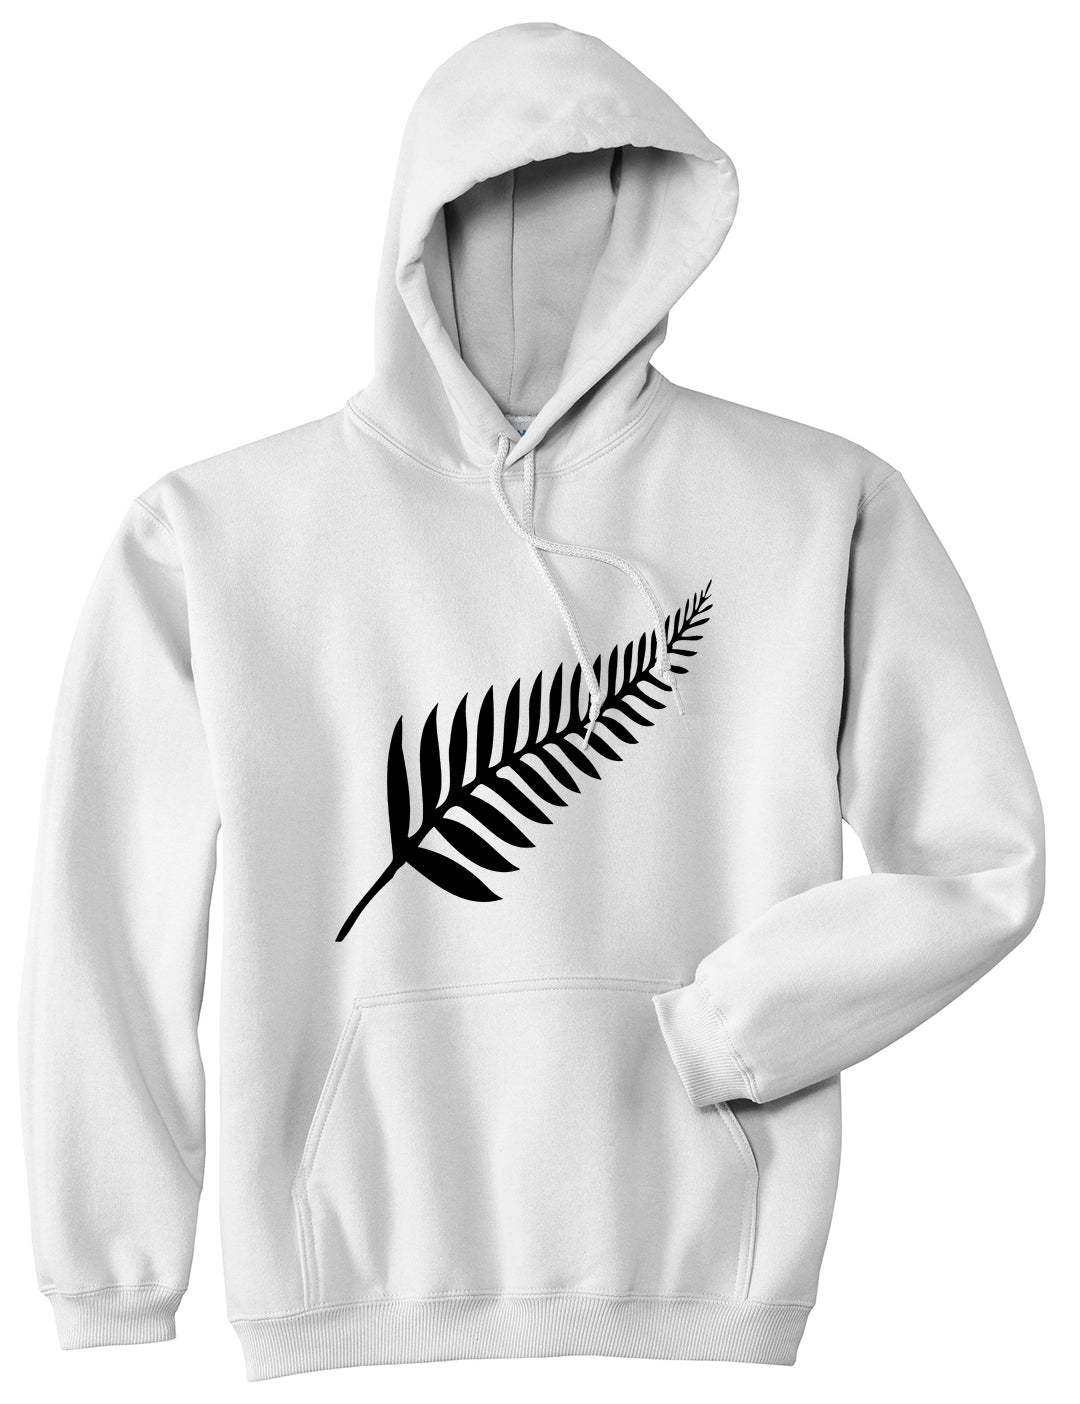 New Zealand Pride Silver Fern Rugby Chest Mens Pullover Hoodie White